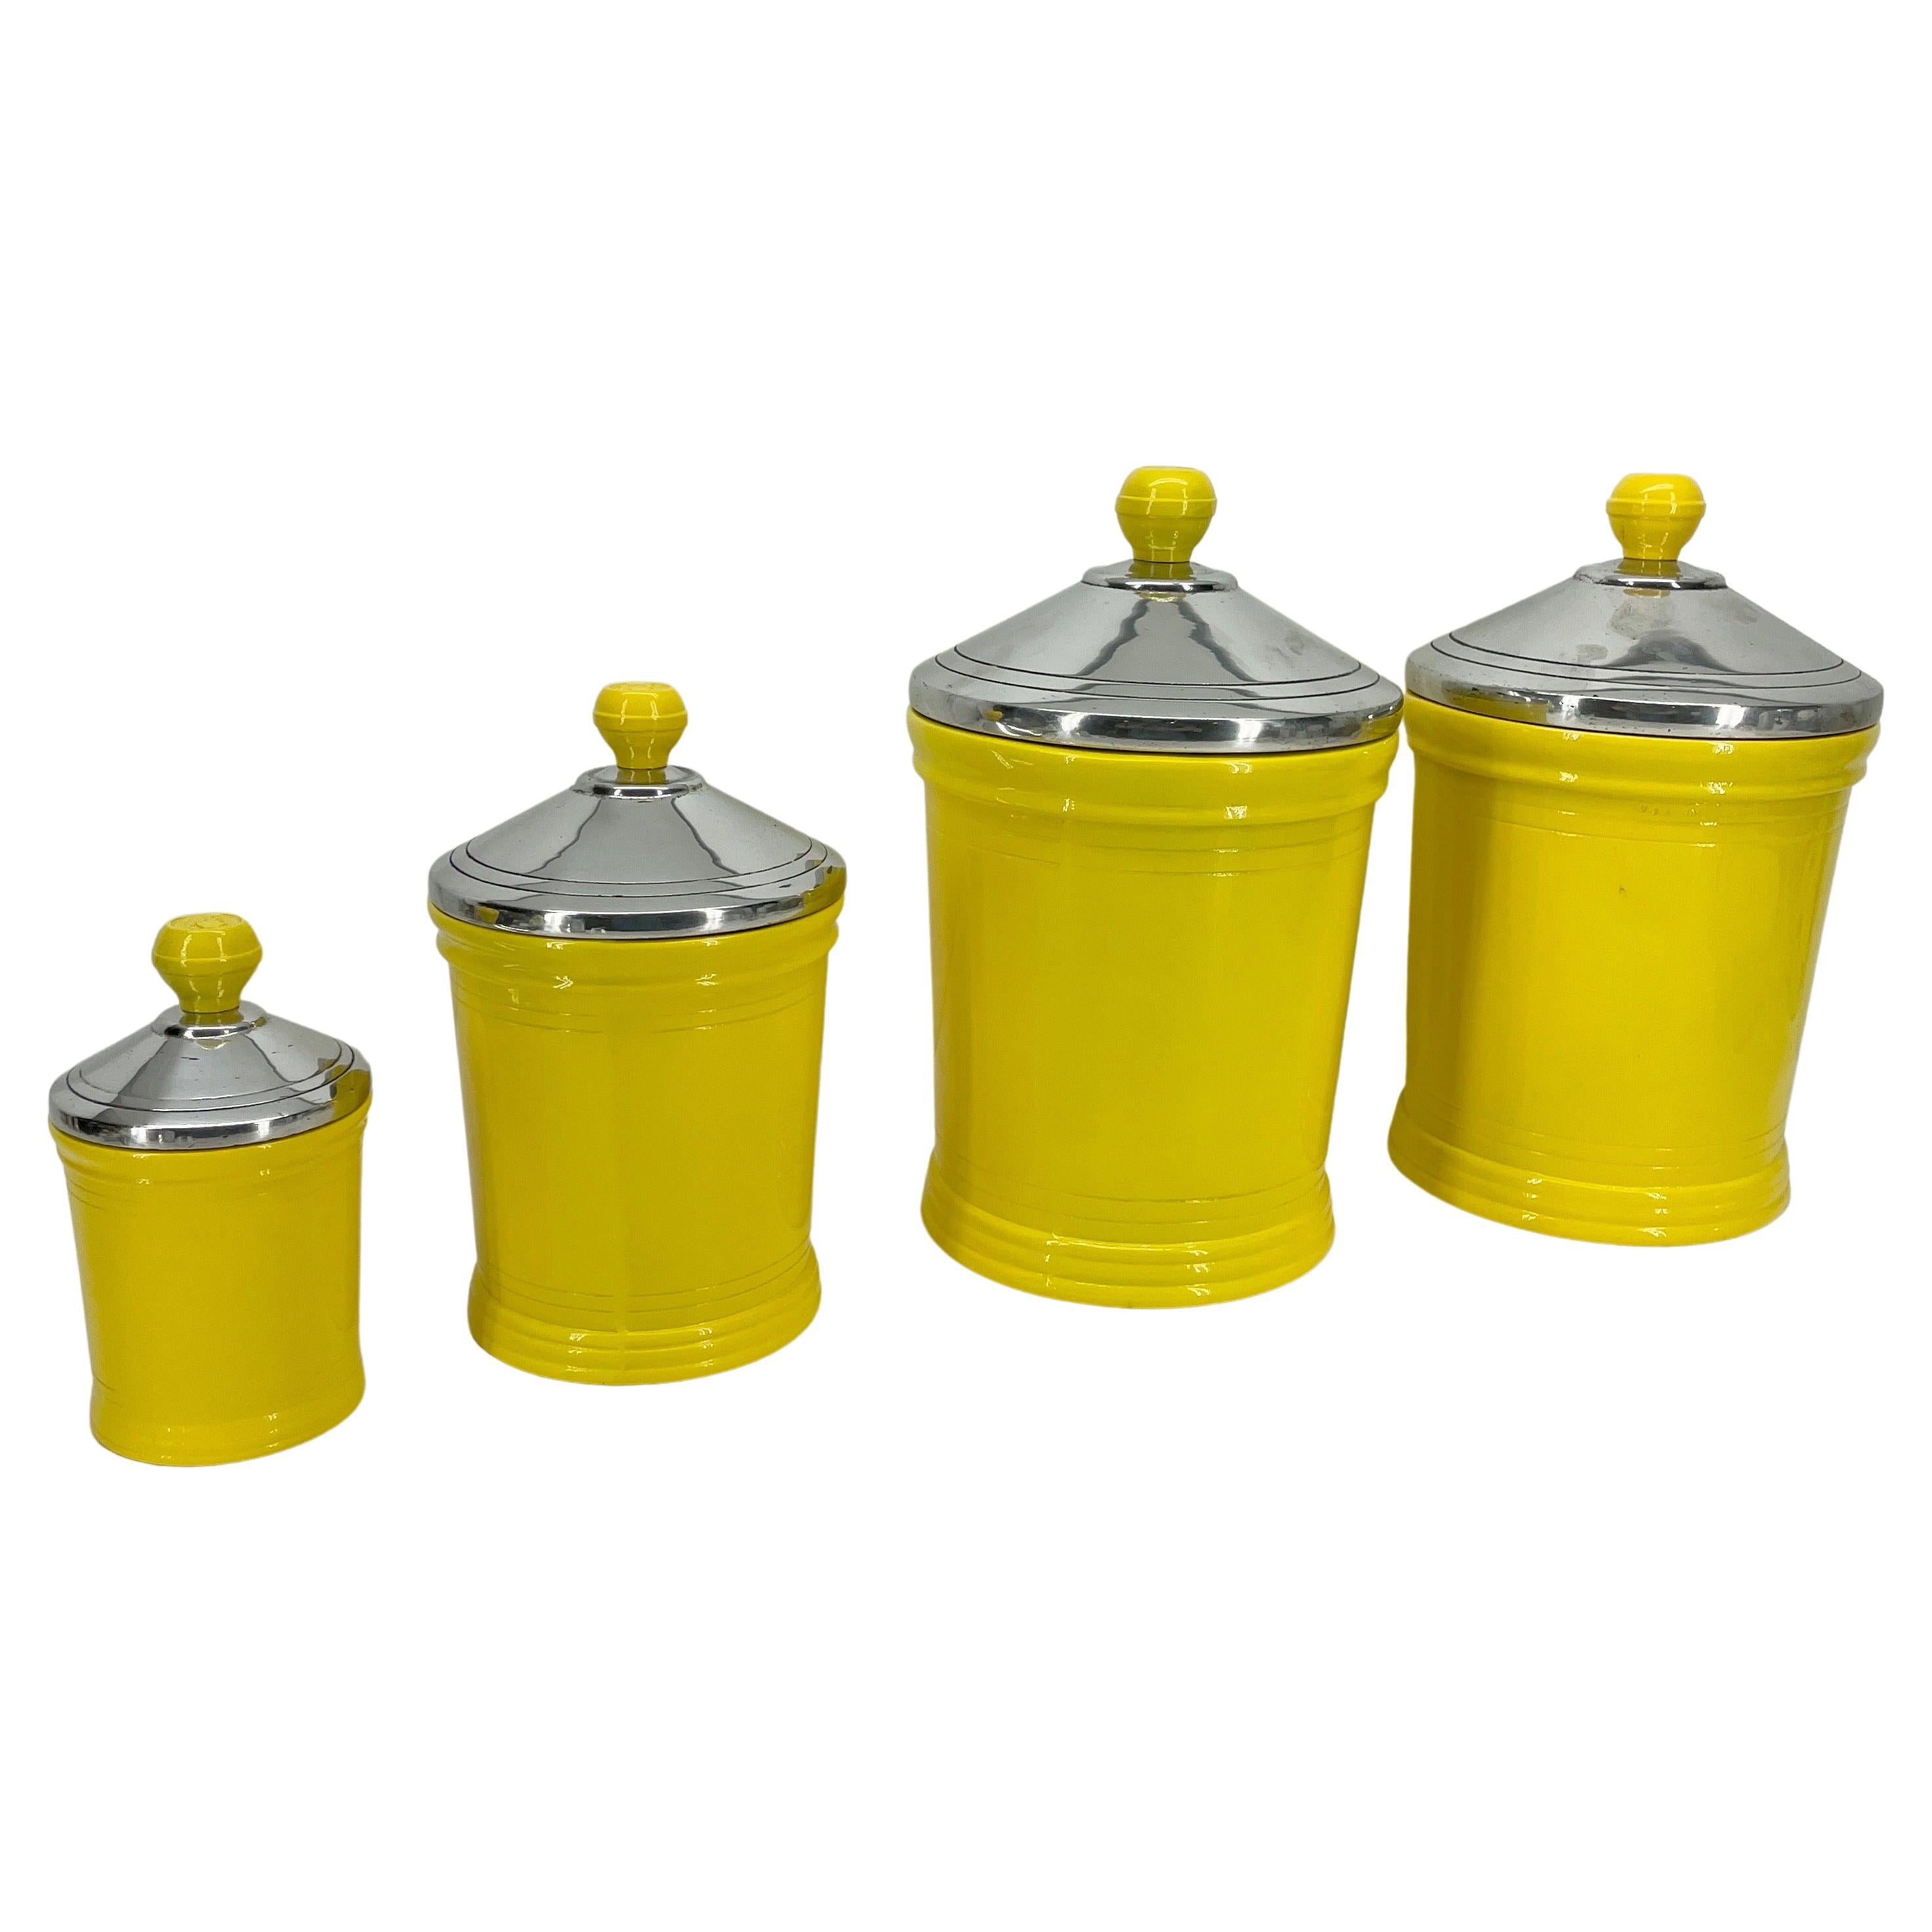 Mid-Century Modern four-piece set of bright sunshine yellow kitchen canister jars, circa 1960's. The charming and bold jars are complete with their original polished chrome lids. Once a staple in every kitchen, the newly powder coated canisters